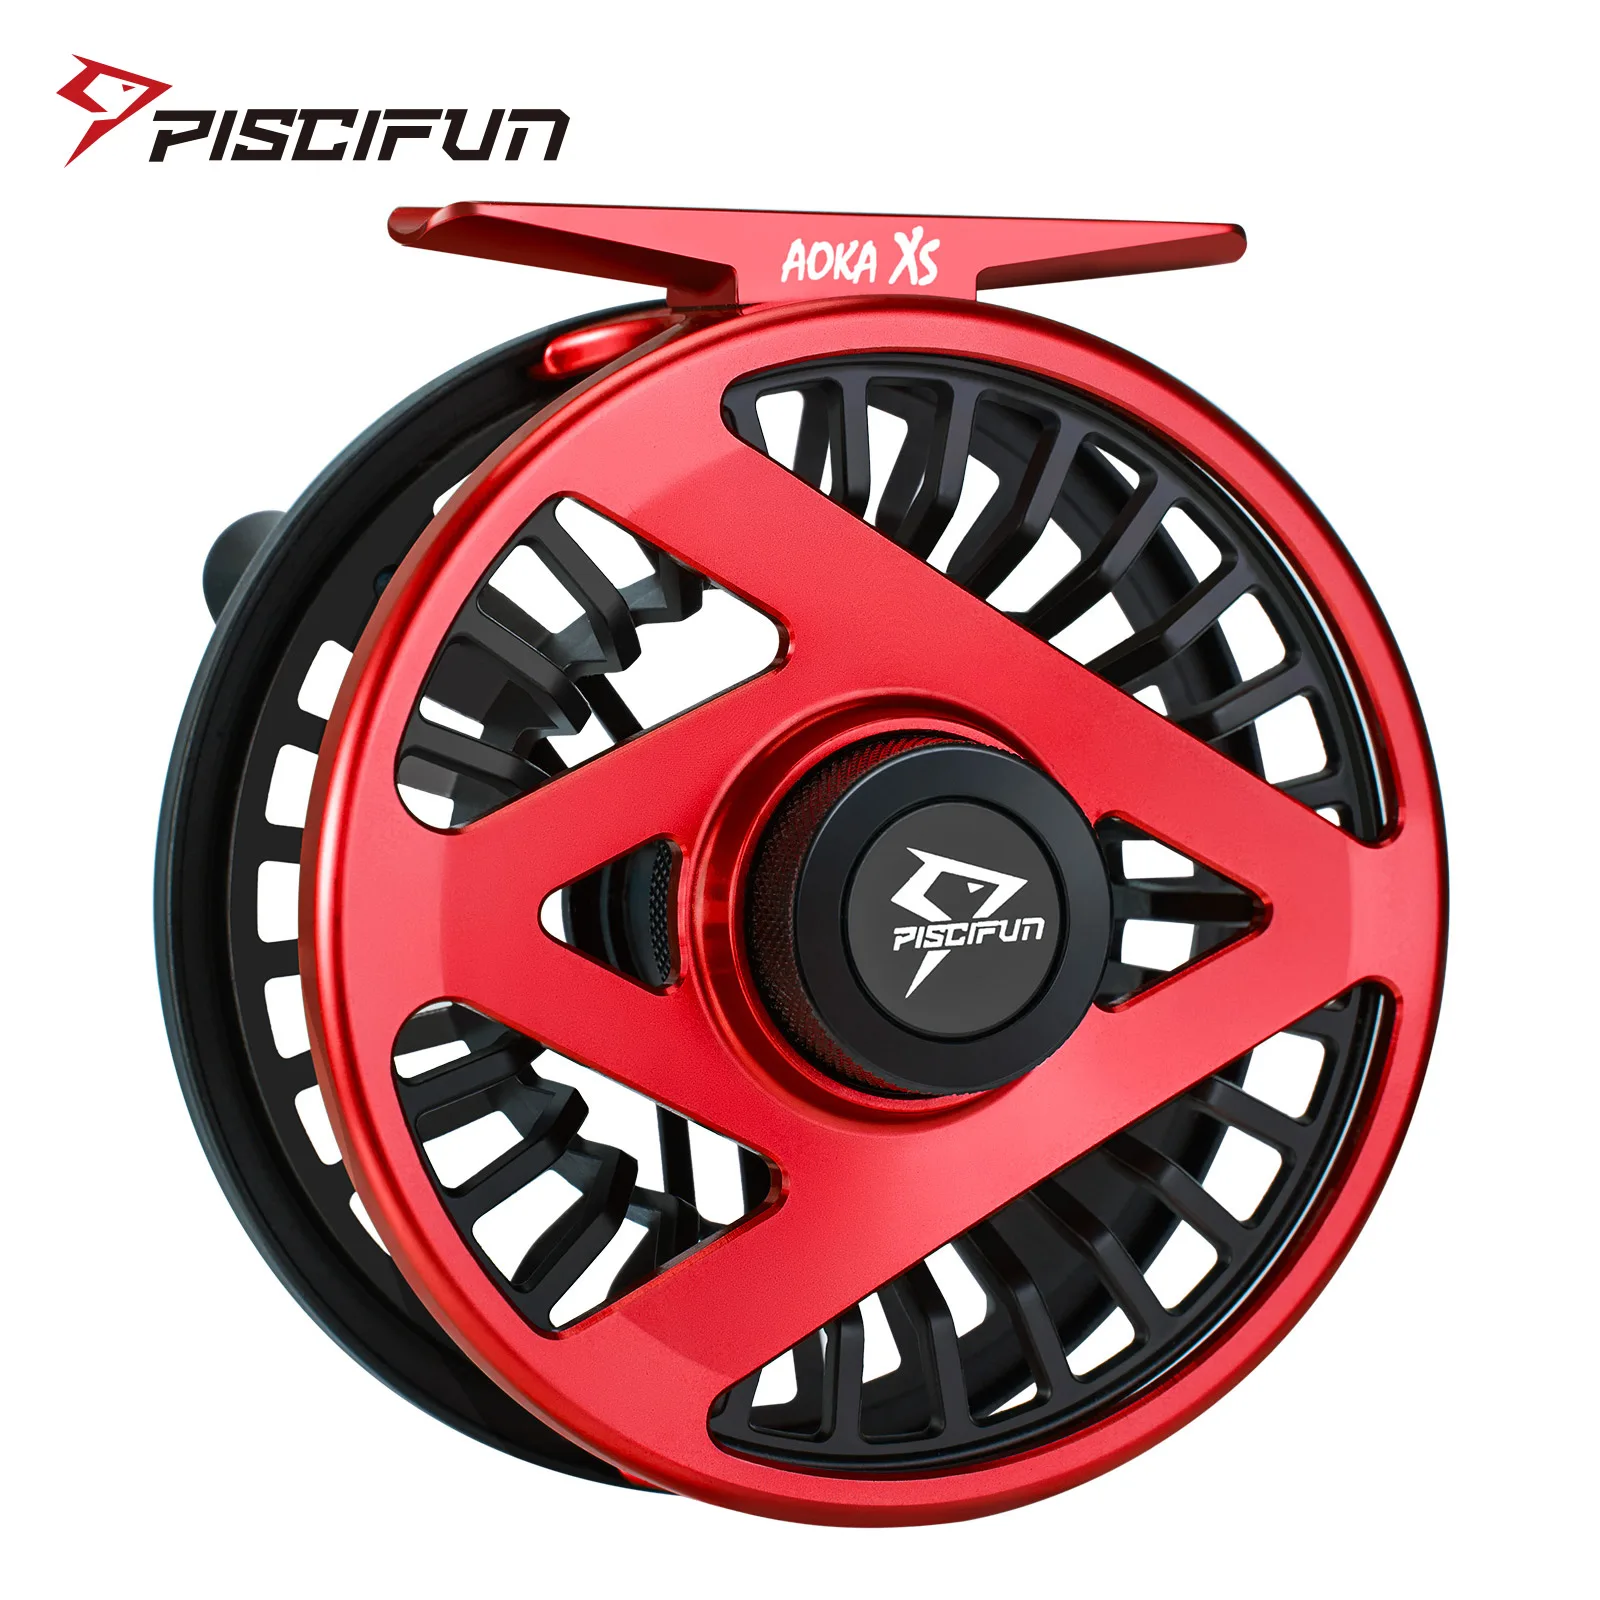 Enlarge Piscifun AOKA XS Fly Fishing Reel Alumimum Alloy Body Sealed Double Click Carbon Fiber Drag System CNC Machined (Red)